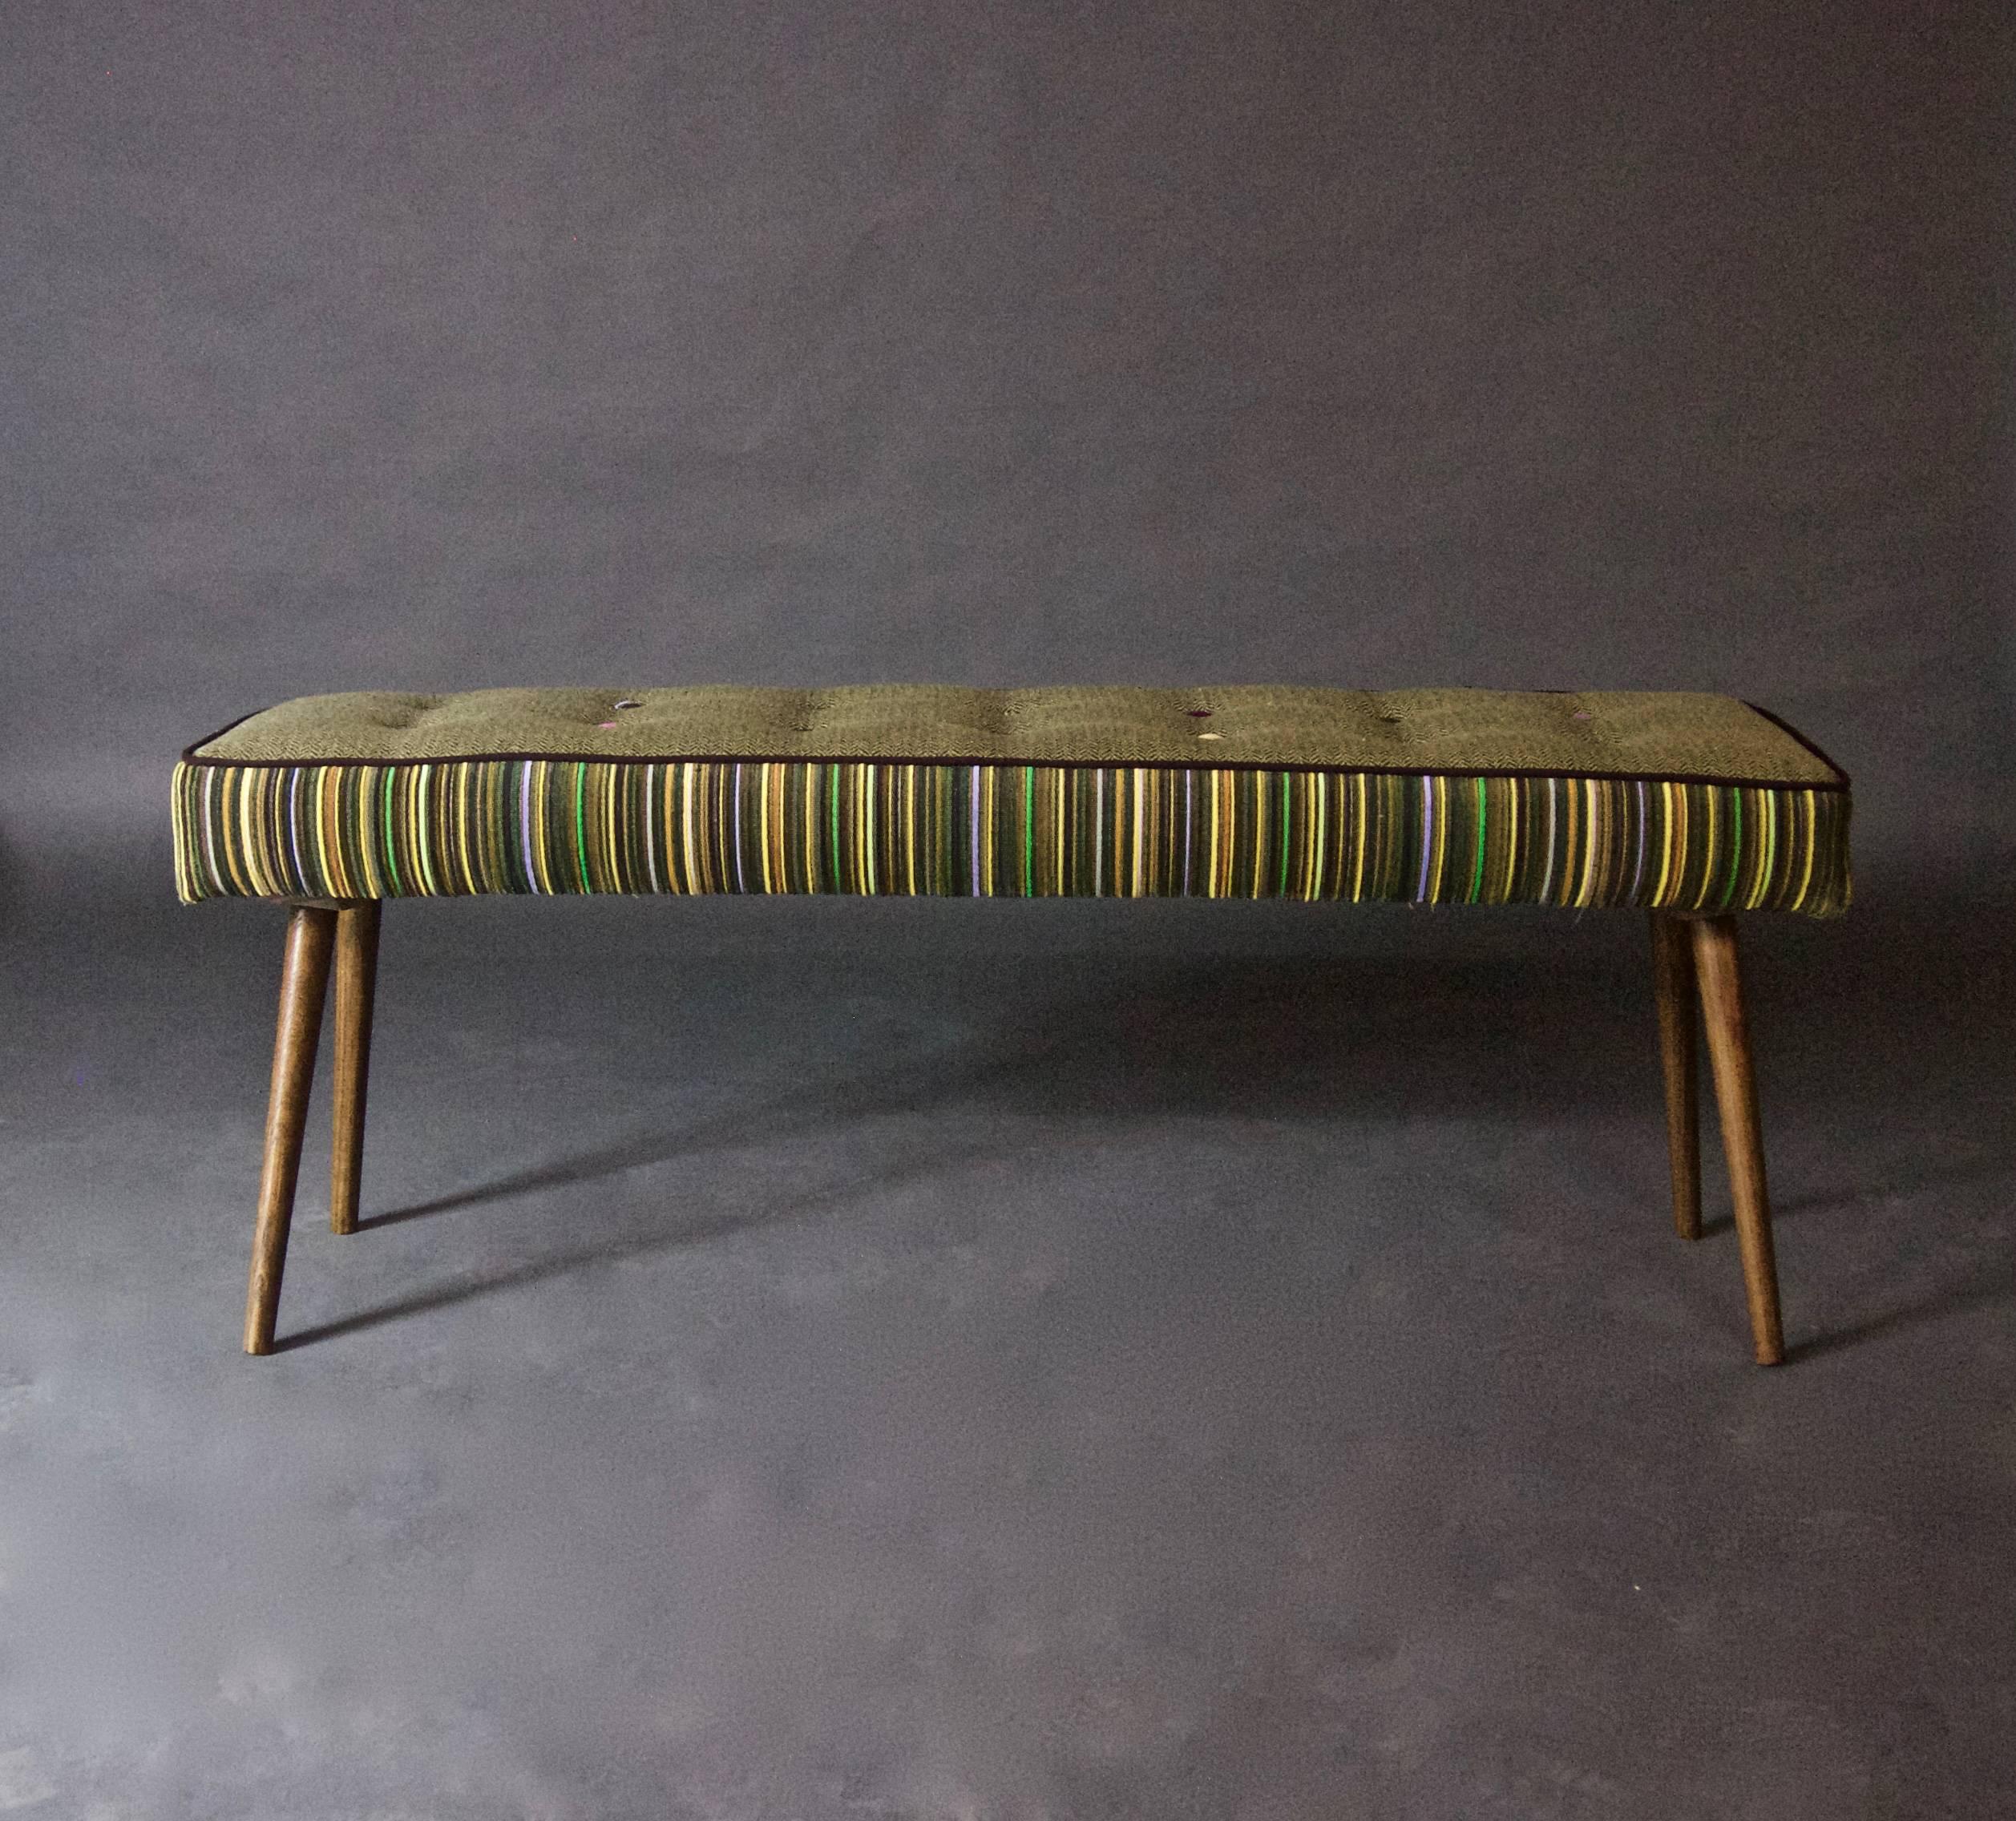 Studio Series Bench Colorful Pinstripes with Herringbone Seat In Excellent Condition For Sale In Brooklyn, NY